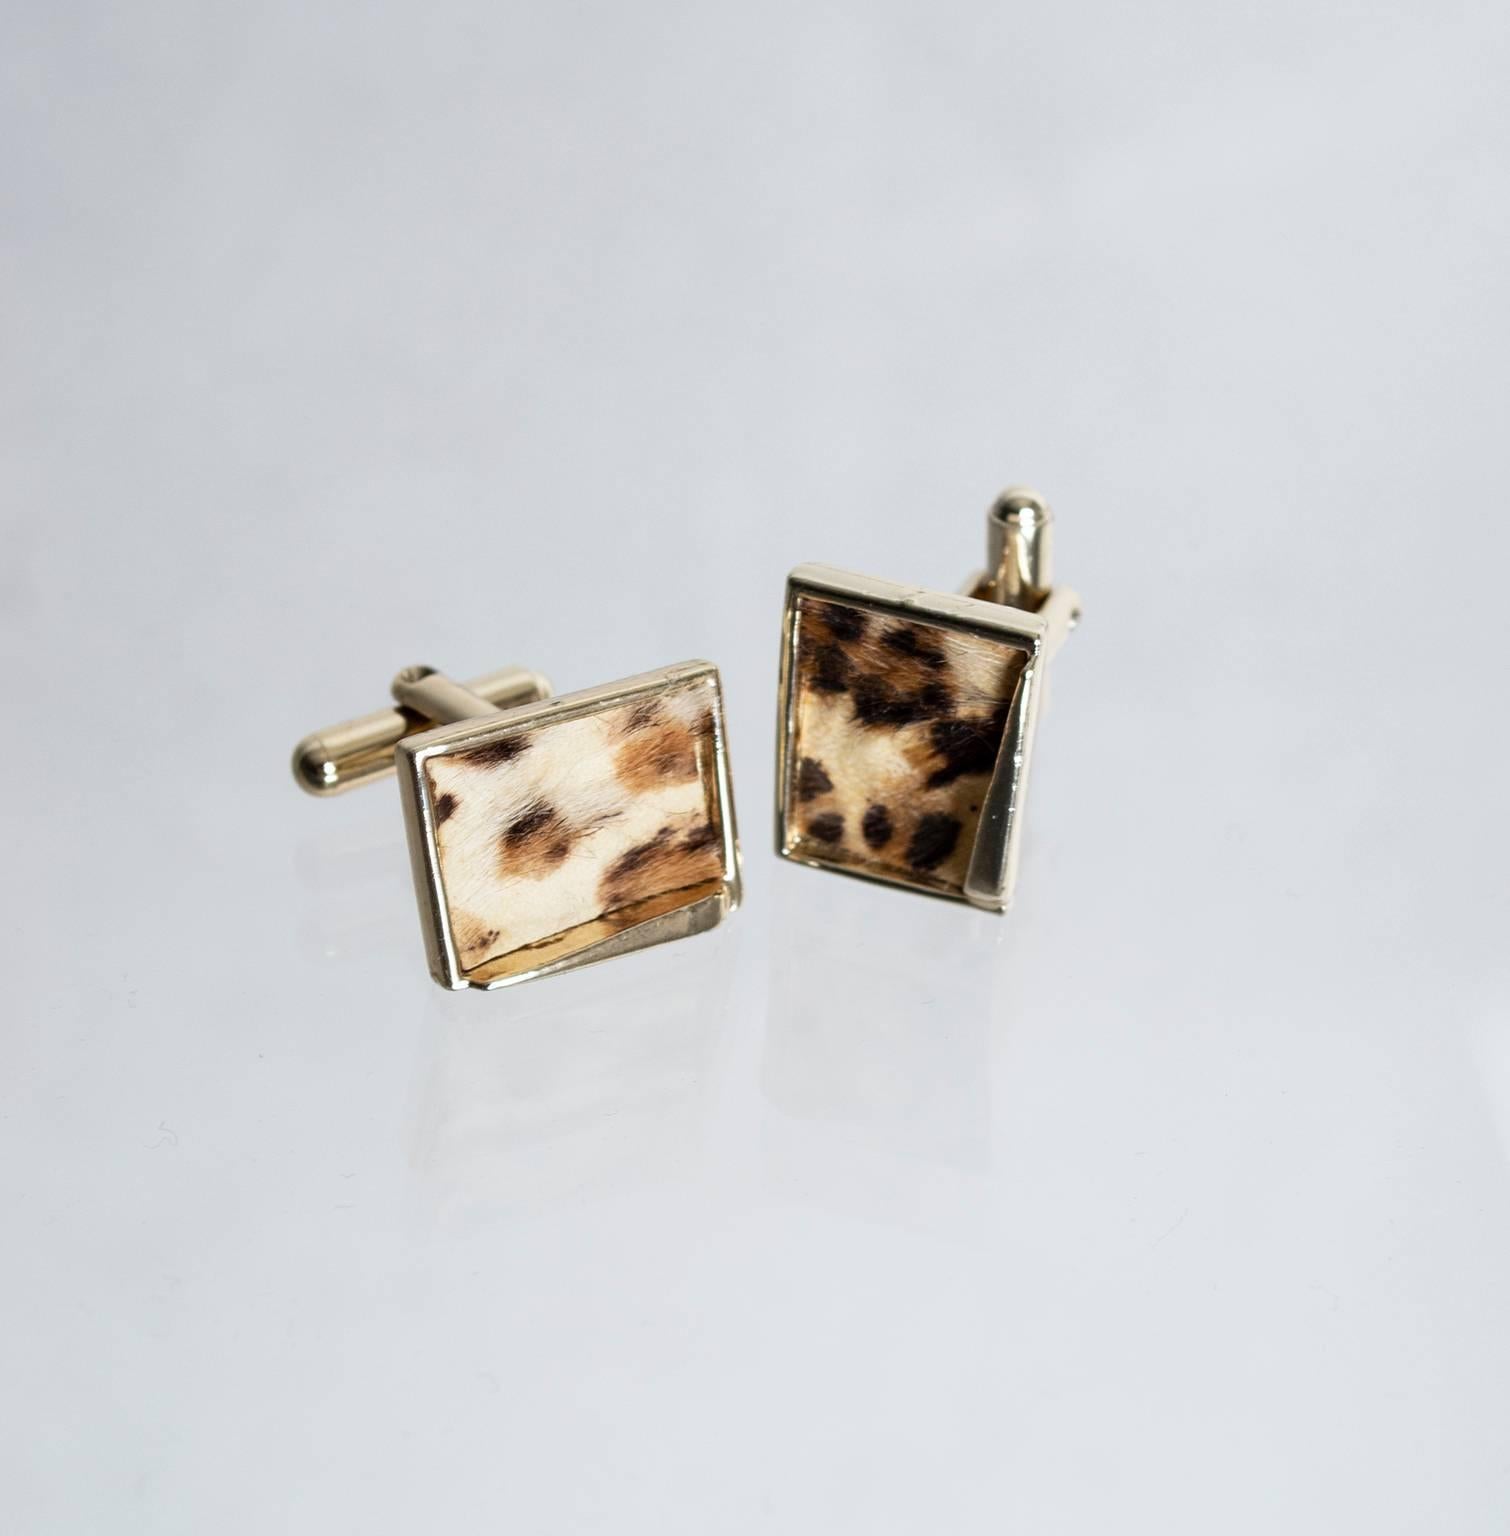 The perfect accompaniment to your slim-lapel suits and skinny ties, these iconic cuff links are the sartorial equivalent to a 2-martini lunch. The best part? They’re pony hair so they’re fuzzy too!

Goldtone metal toggle cuff links inset with